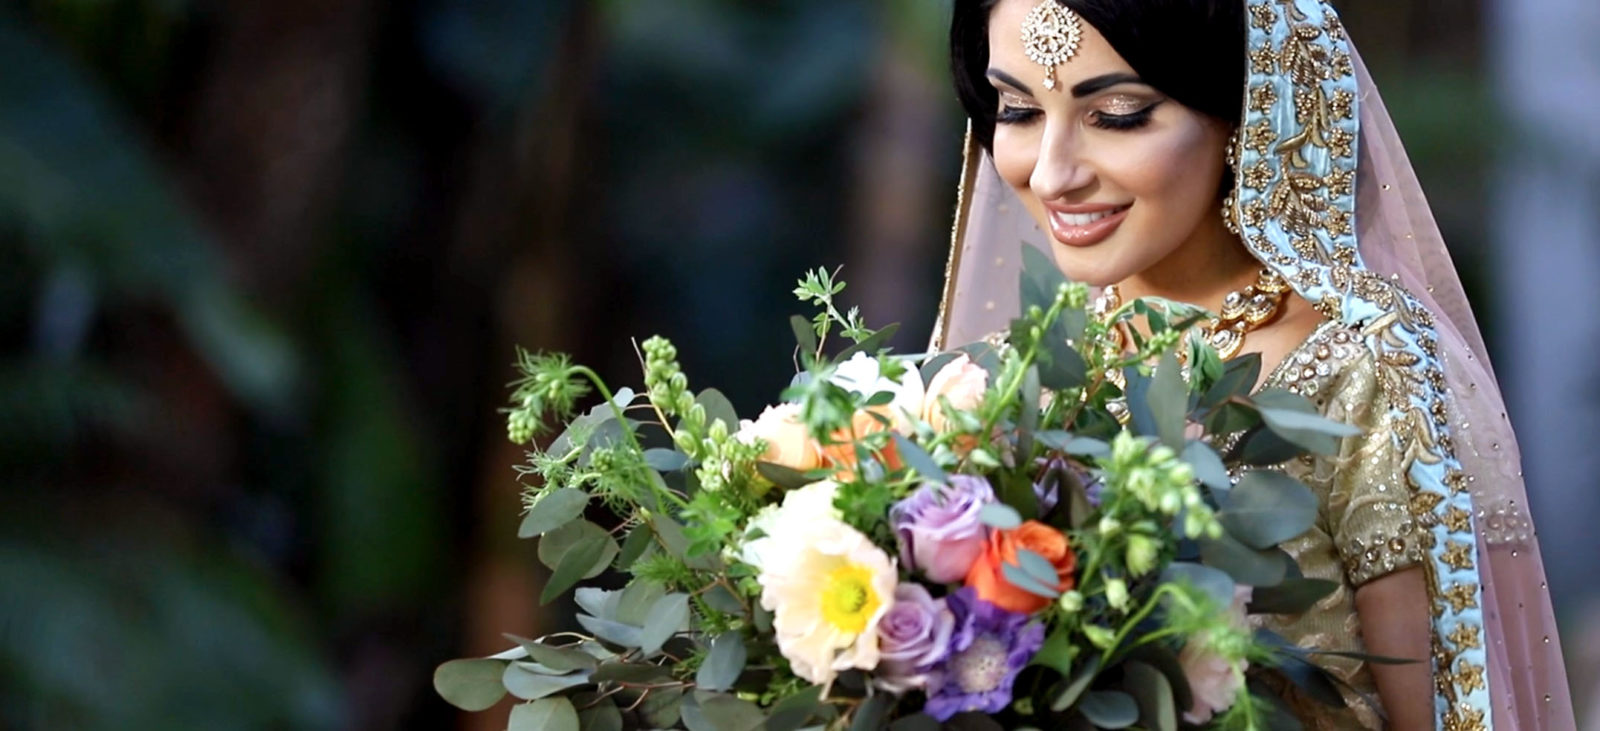 Indian wedding photography and video service